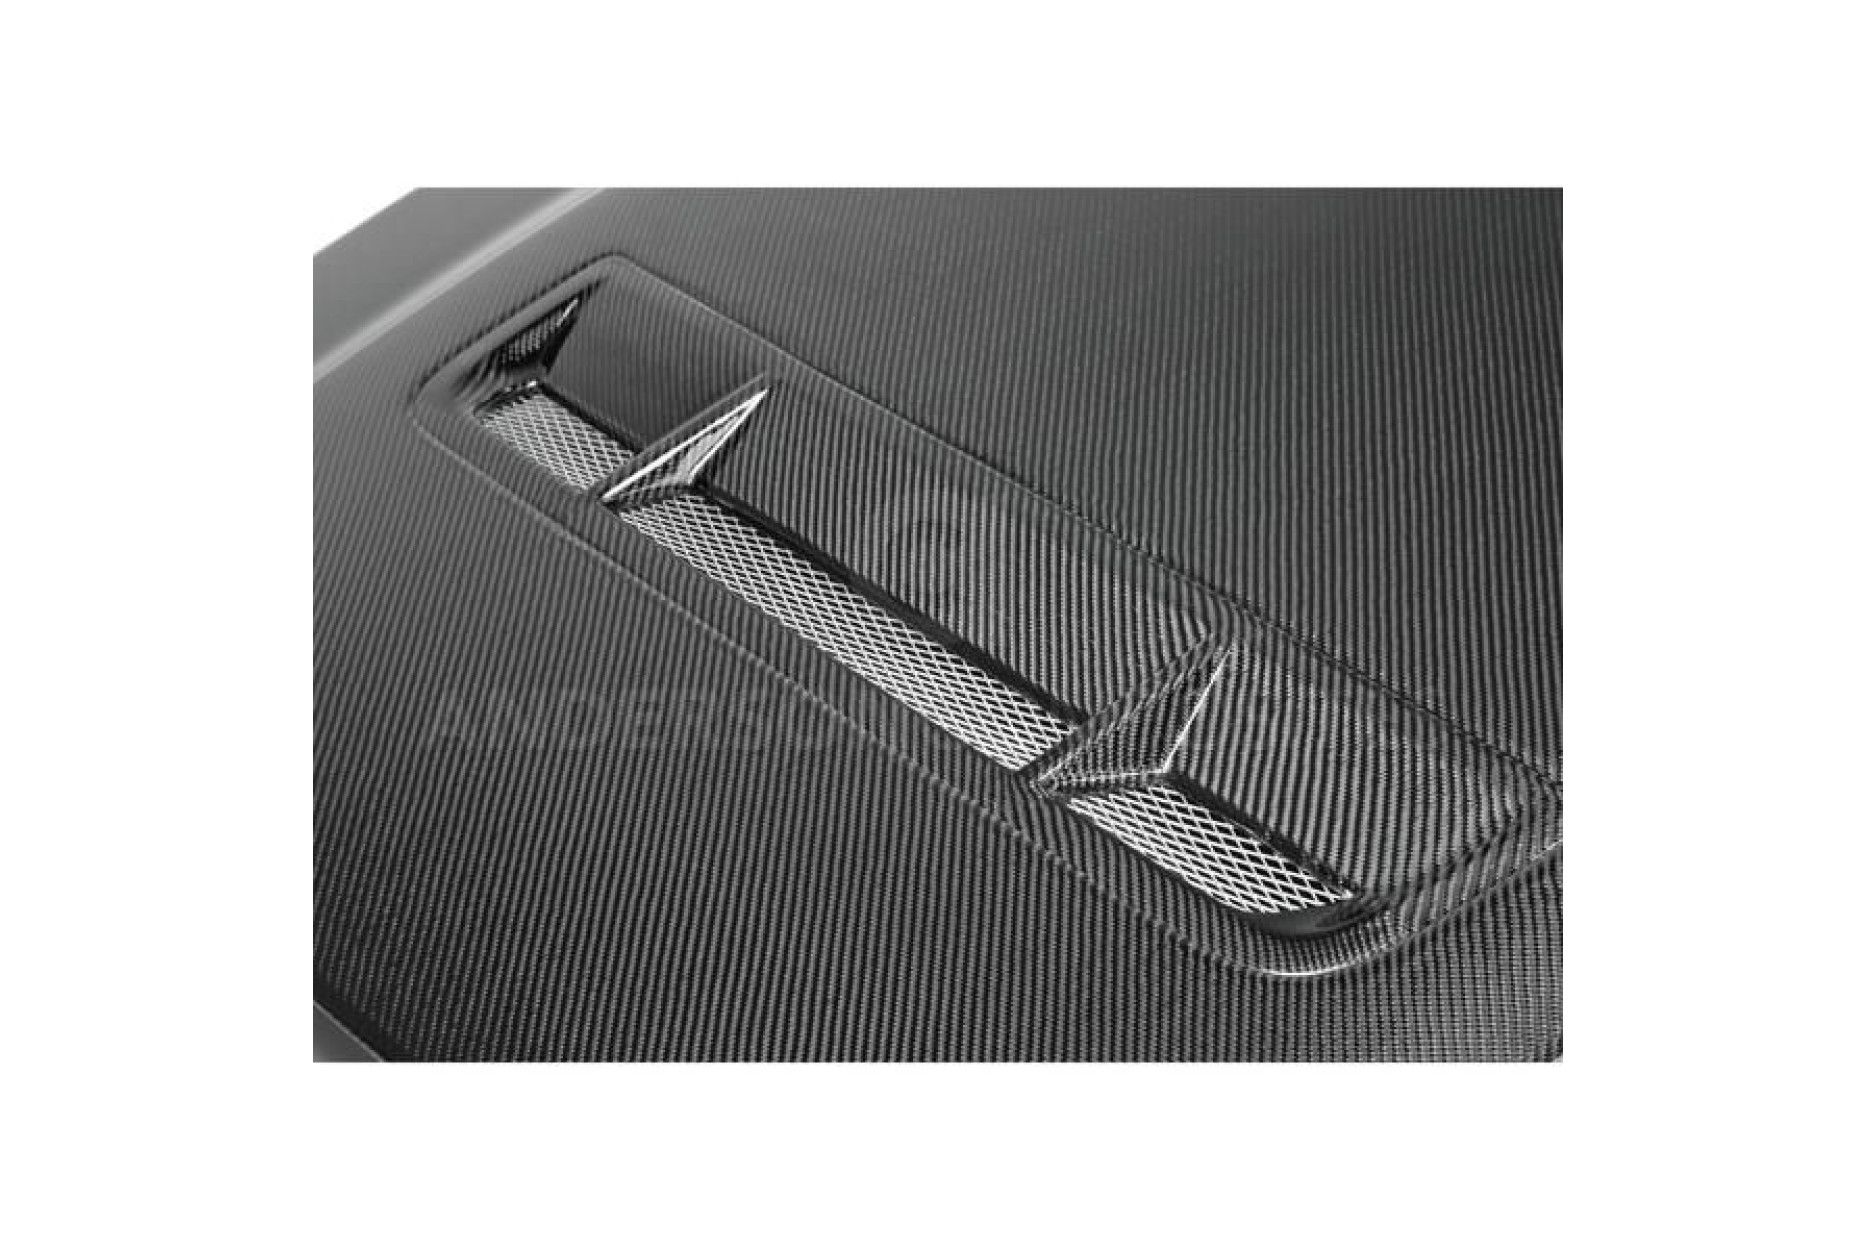 Anderson Composites Type-GT carbon fiber hood for 2010-2014 Ford Mustang GT500 and 2013-2014 Mustang GT/V6 (2) 